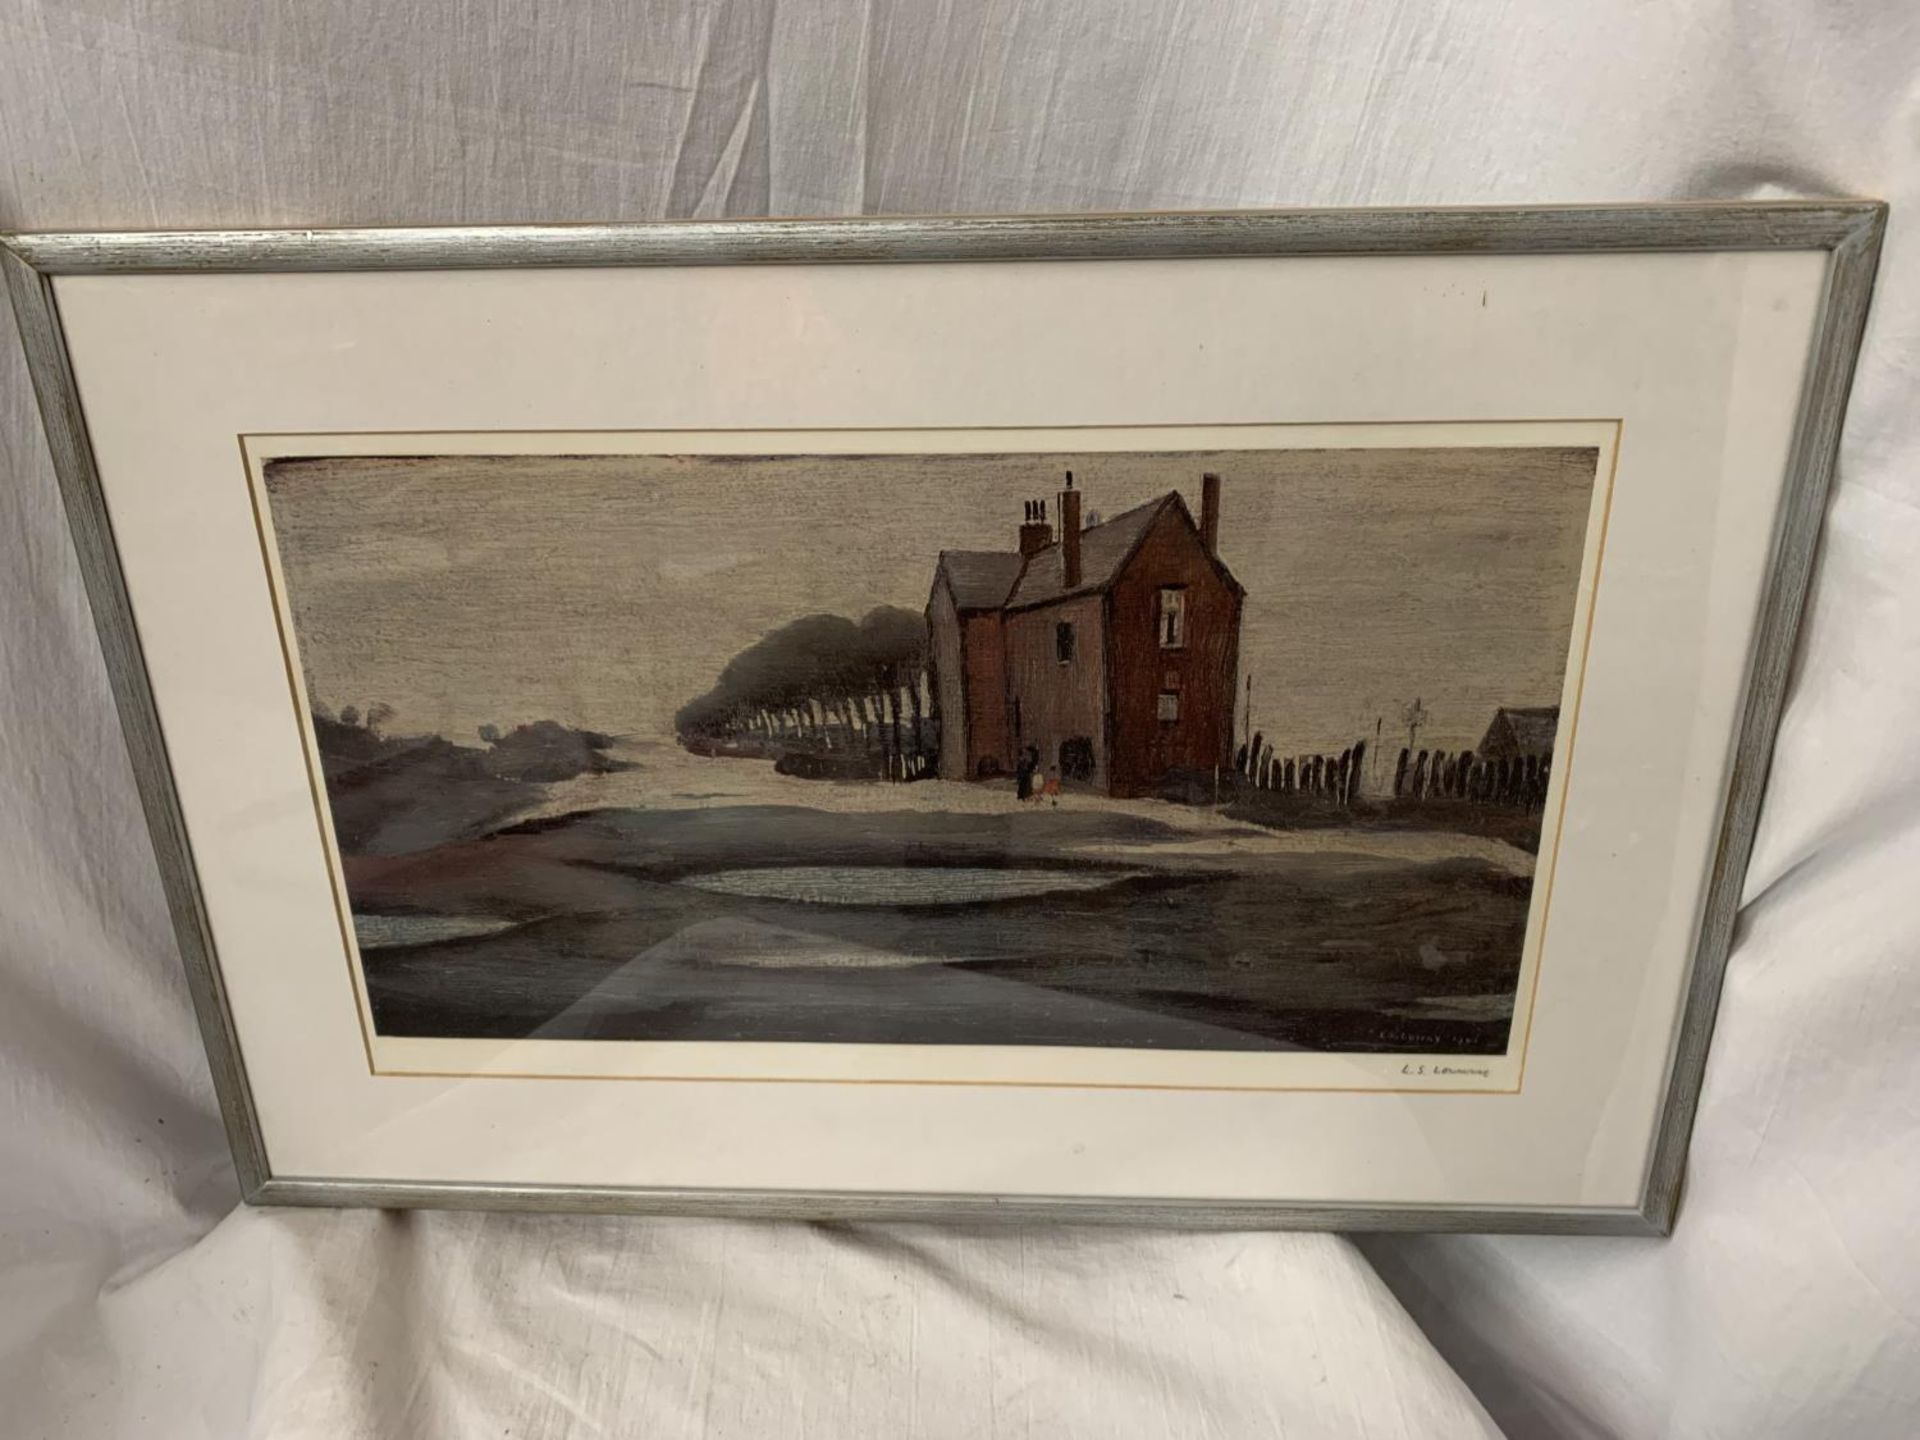 A LAURENCE STEPHEN LOWRY R.A (1887-1976) 'THE LONELY HOUSE' SIGNED IN PENCIL WITH MAGNUS PRINTS - Image 4 of 4